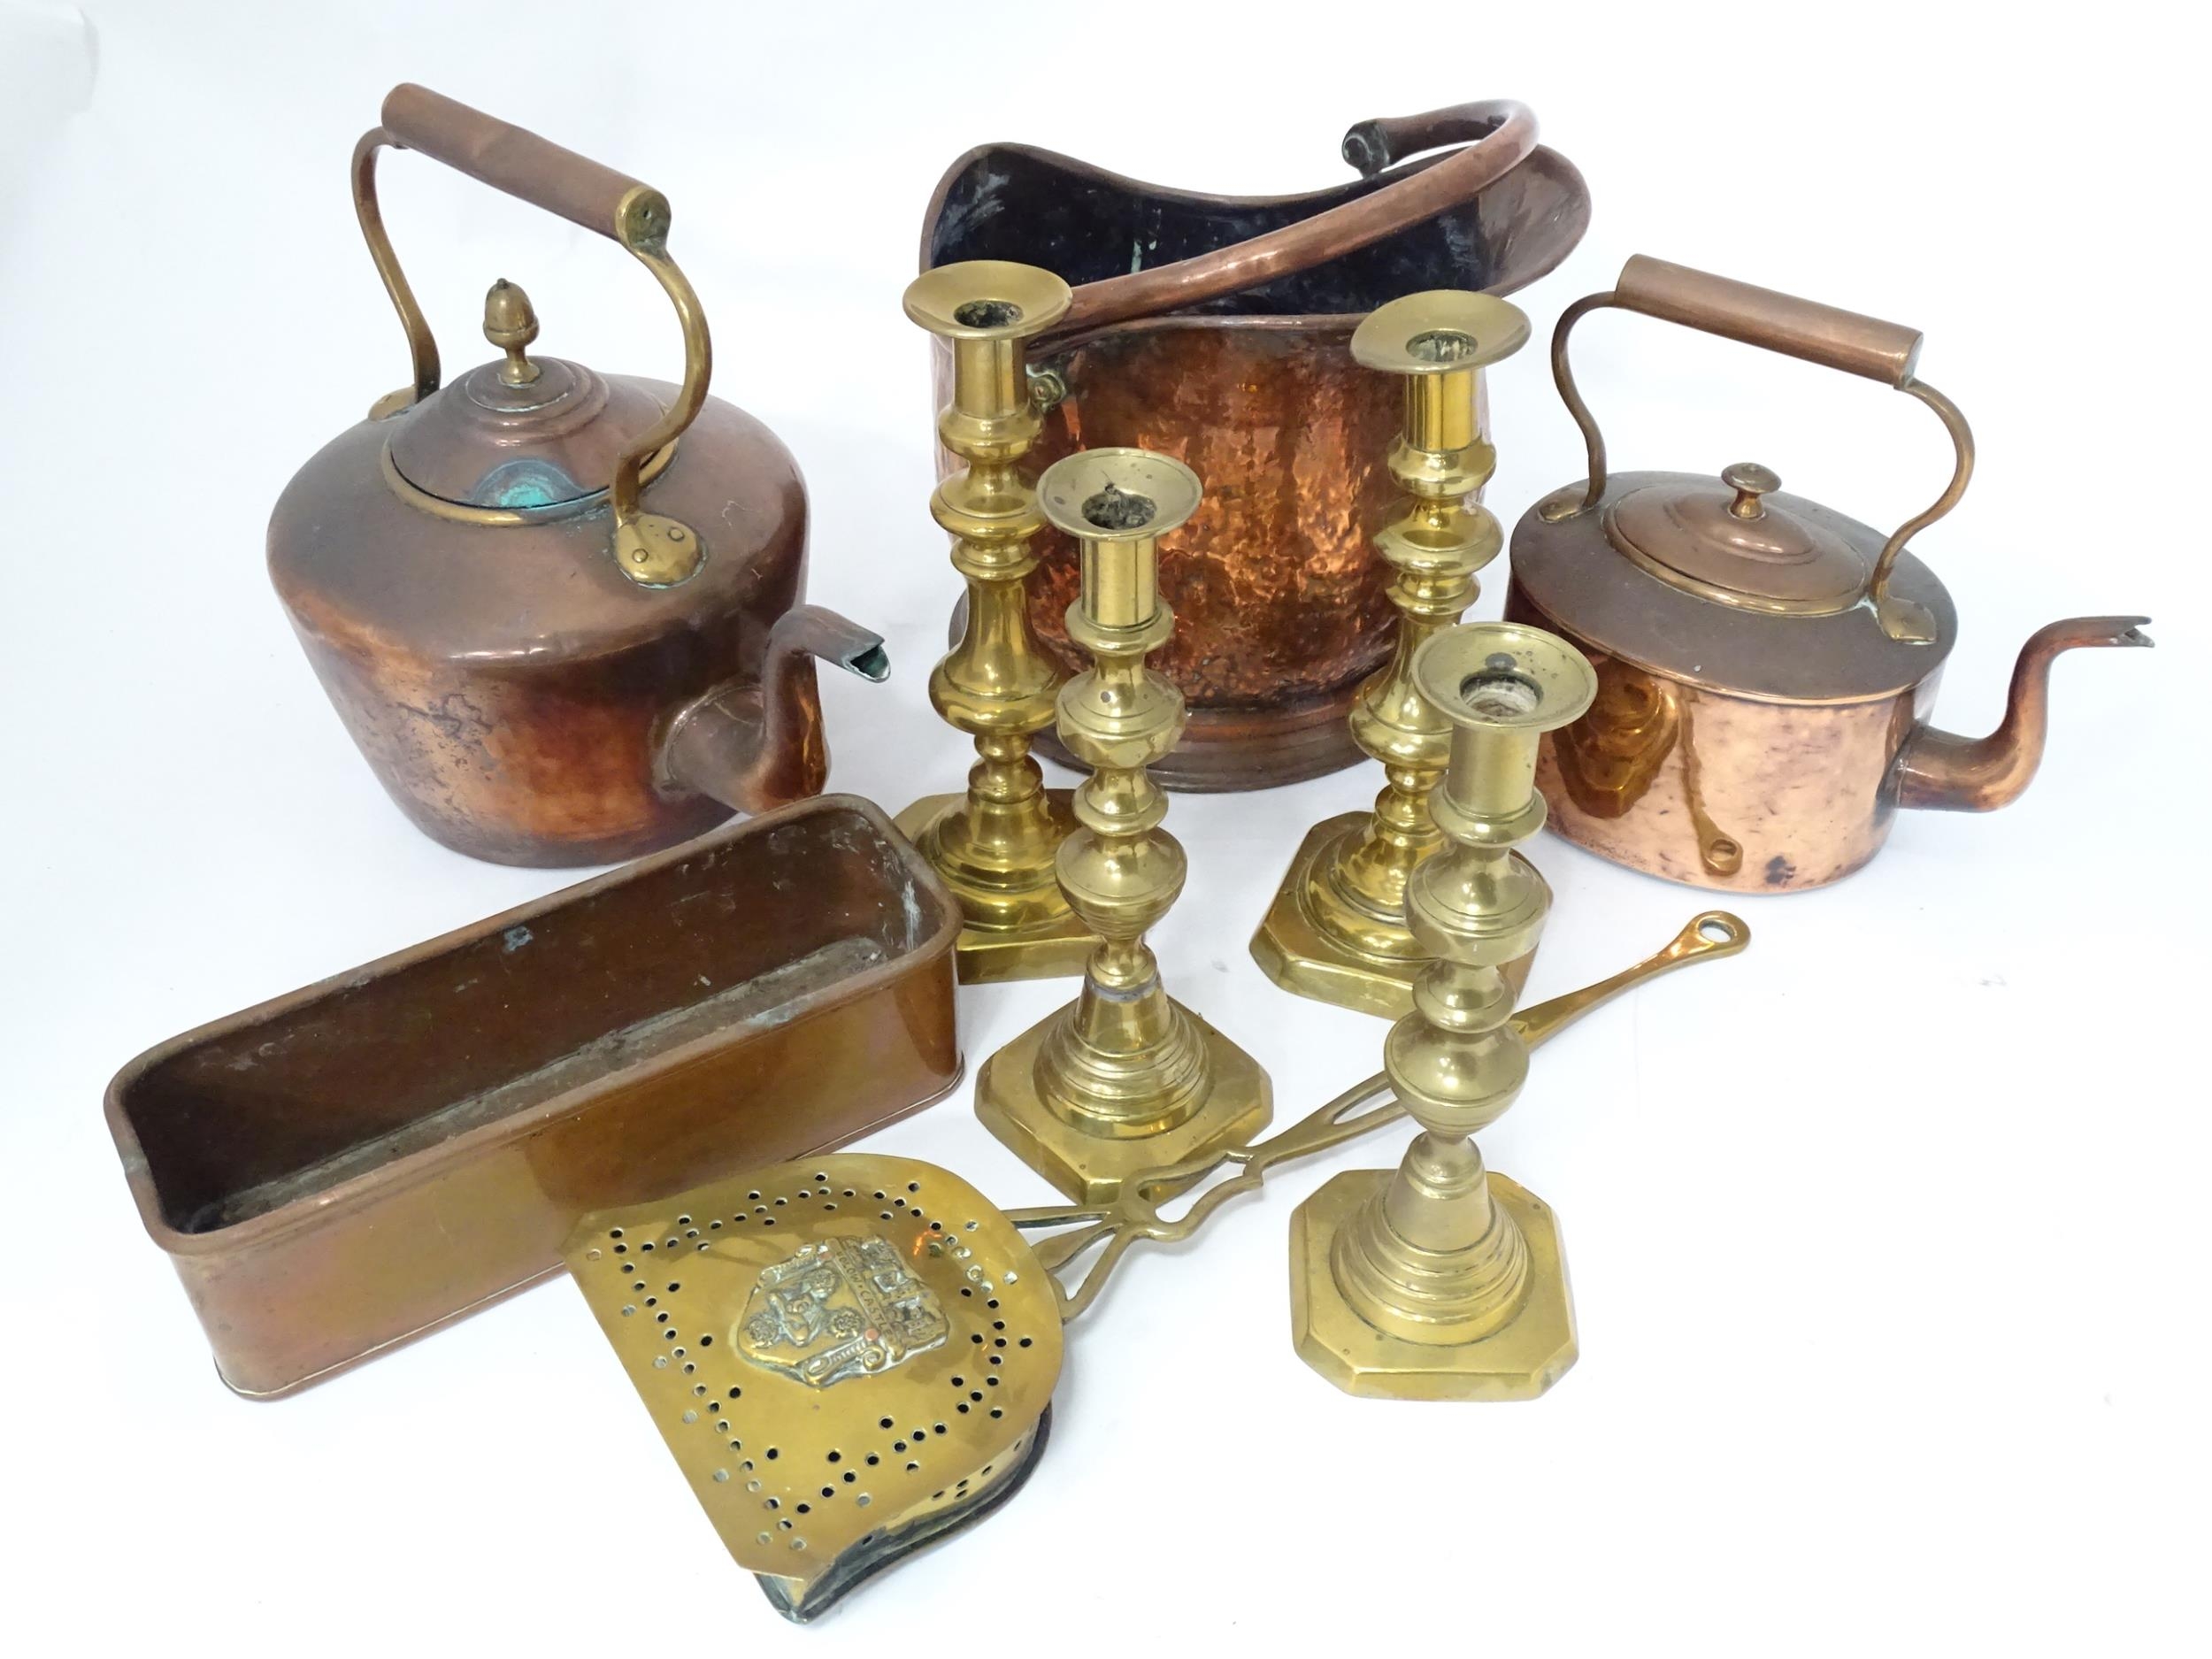 A quantity of brass and copper wares to include coal scuttle, kettles, copper pot, candlesticks, - Image 4 of 6